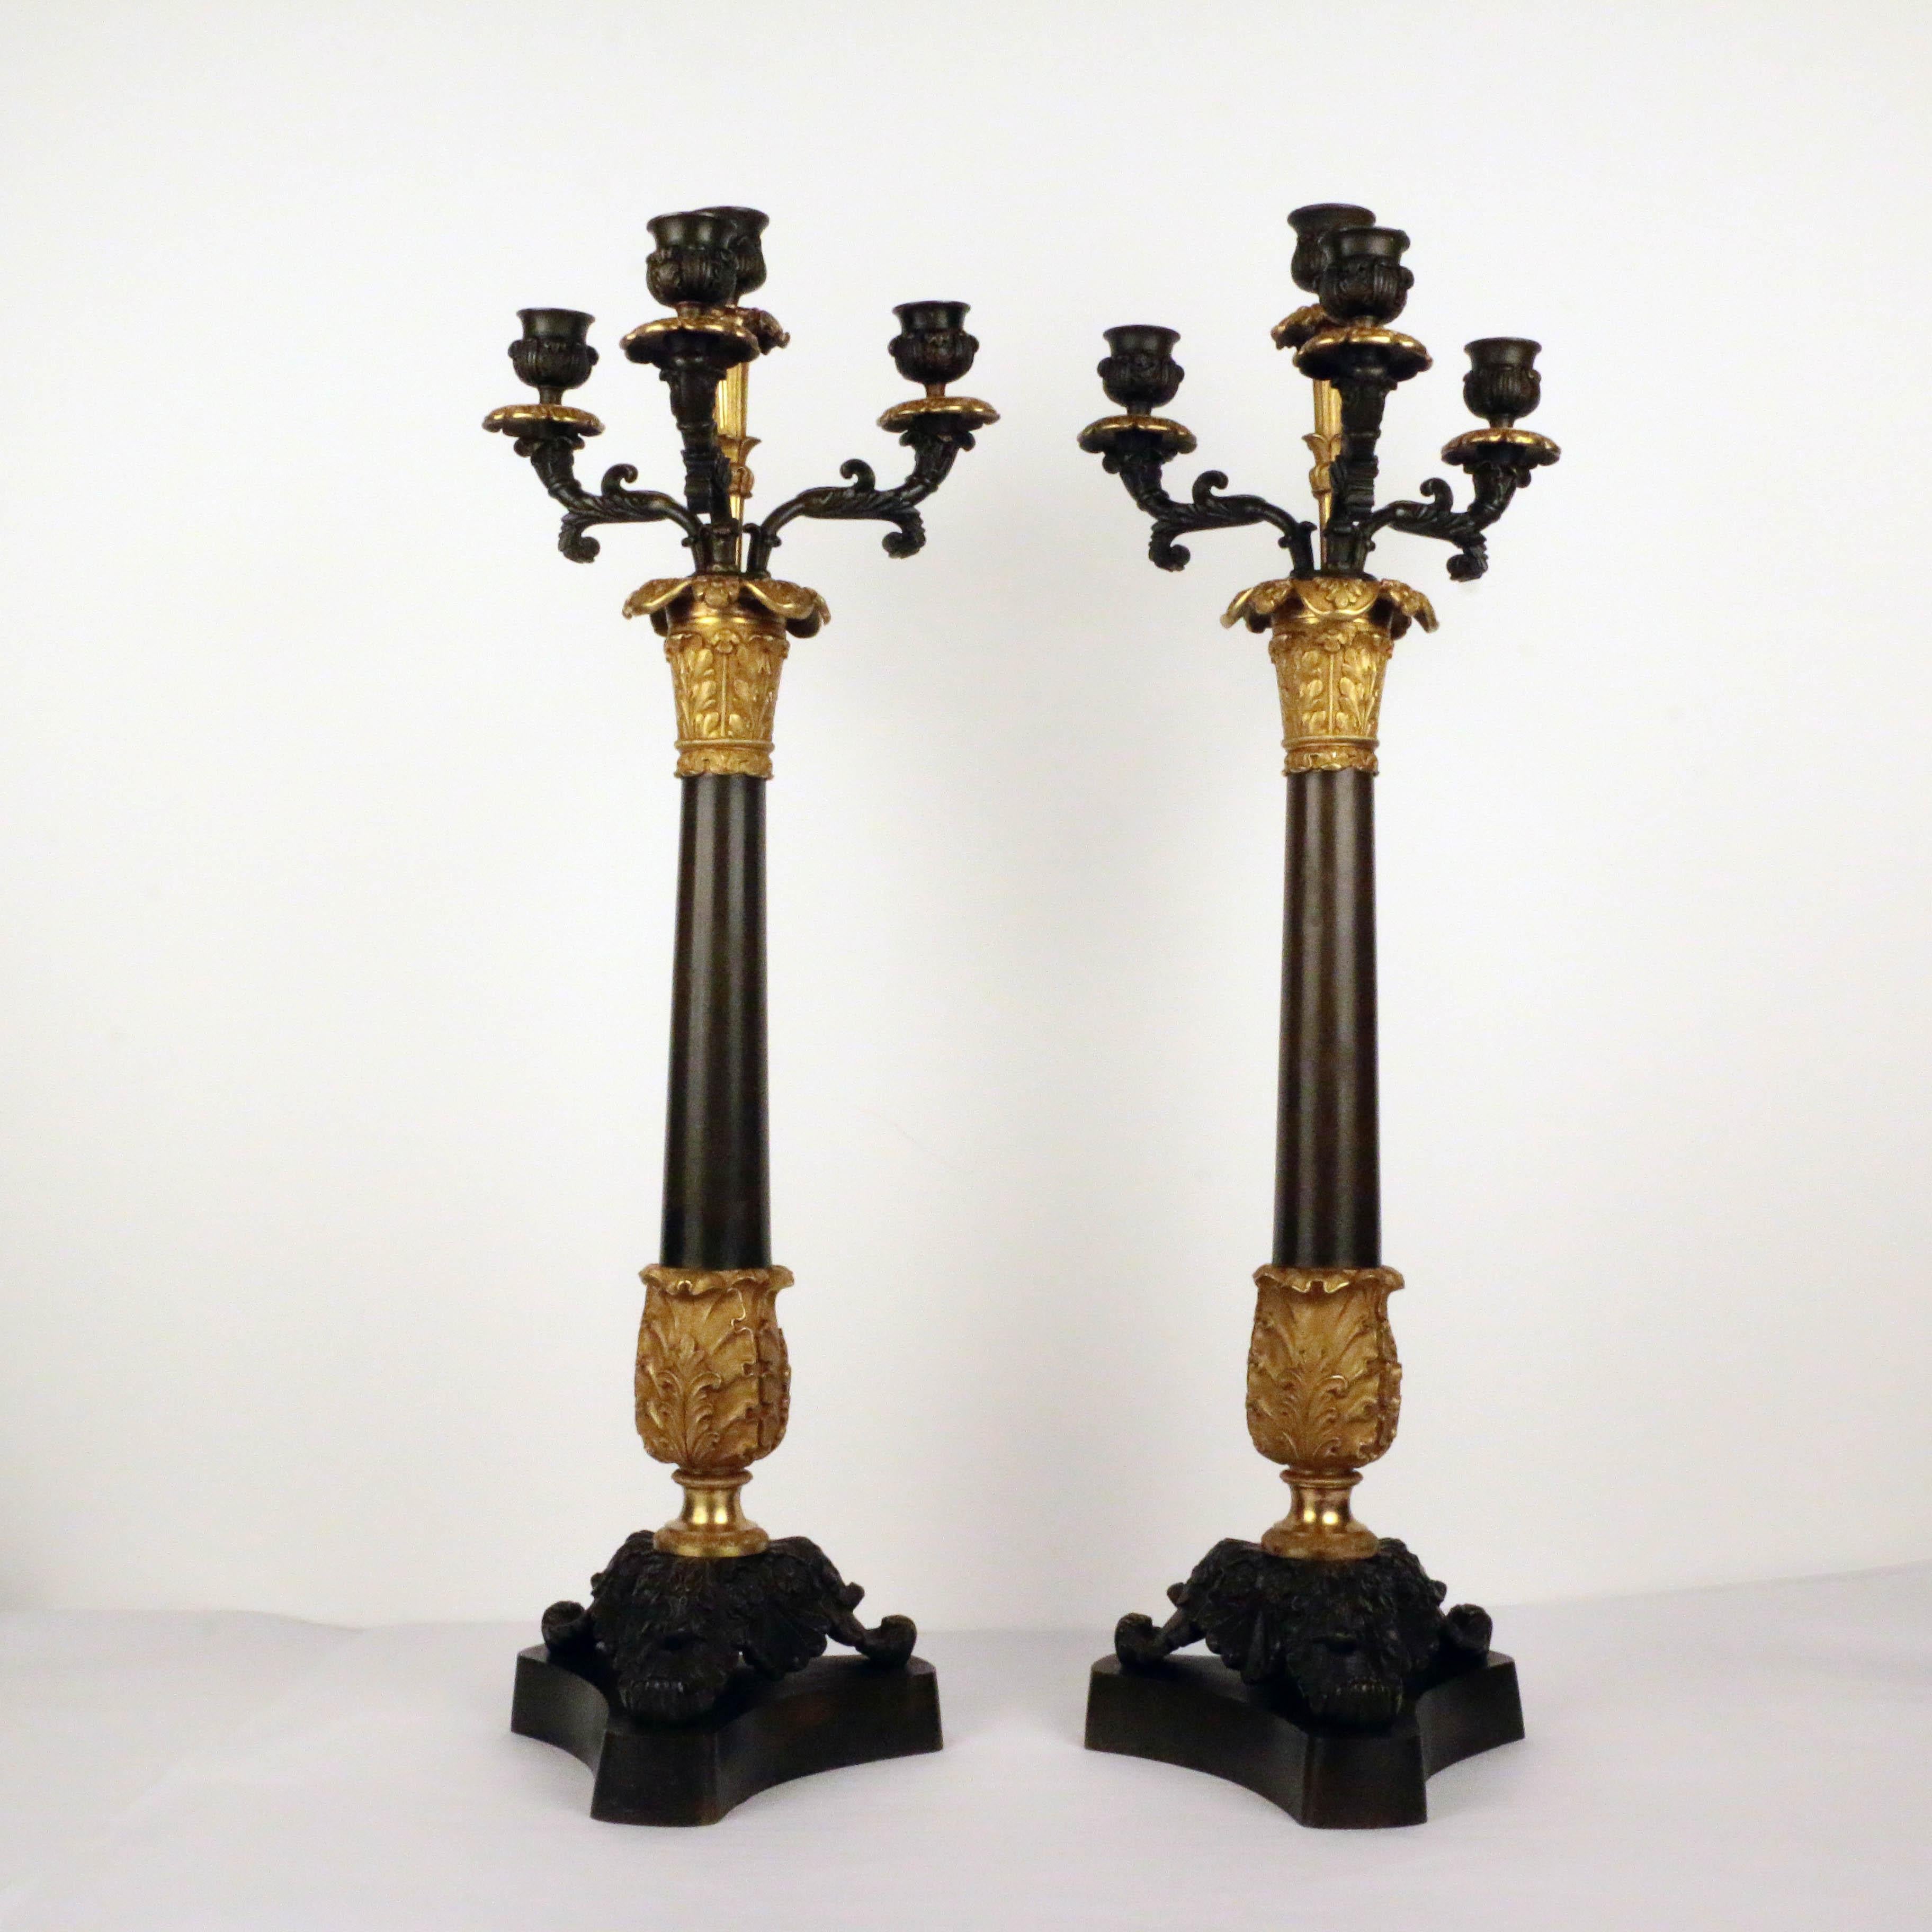 Pair of Empire period parcel-gilt and patinated bronze four-light candelabra, the patinated column raised on triform scrolled feet over incurved plinth supporting a gilt bronze standard with urn form patinated candle cups, flanked by scrolling